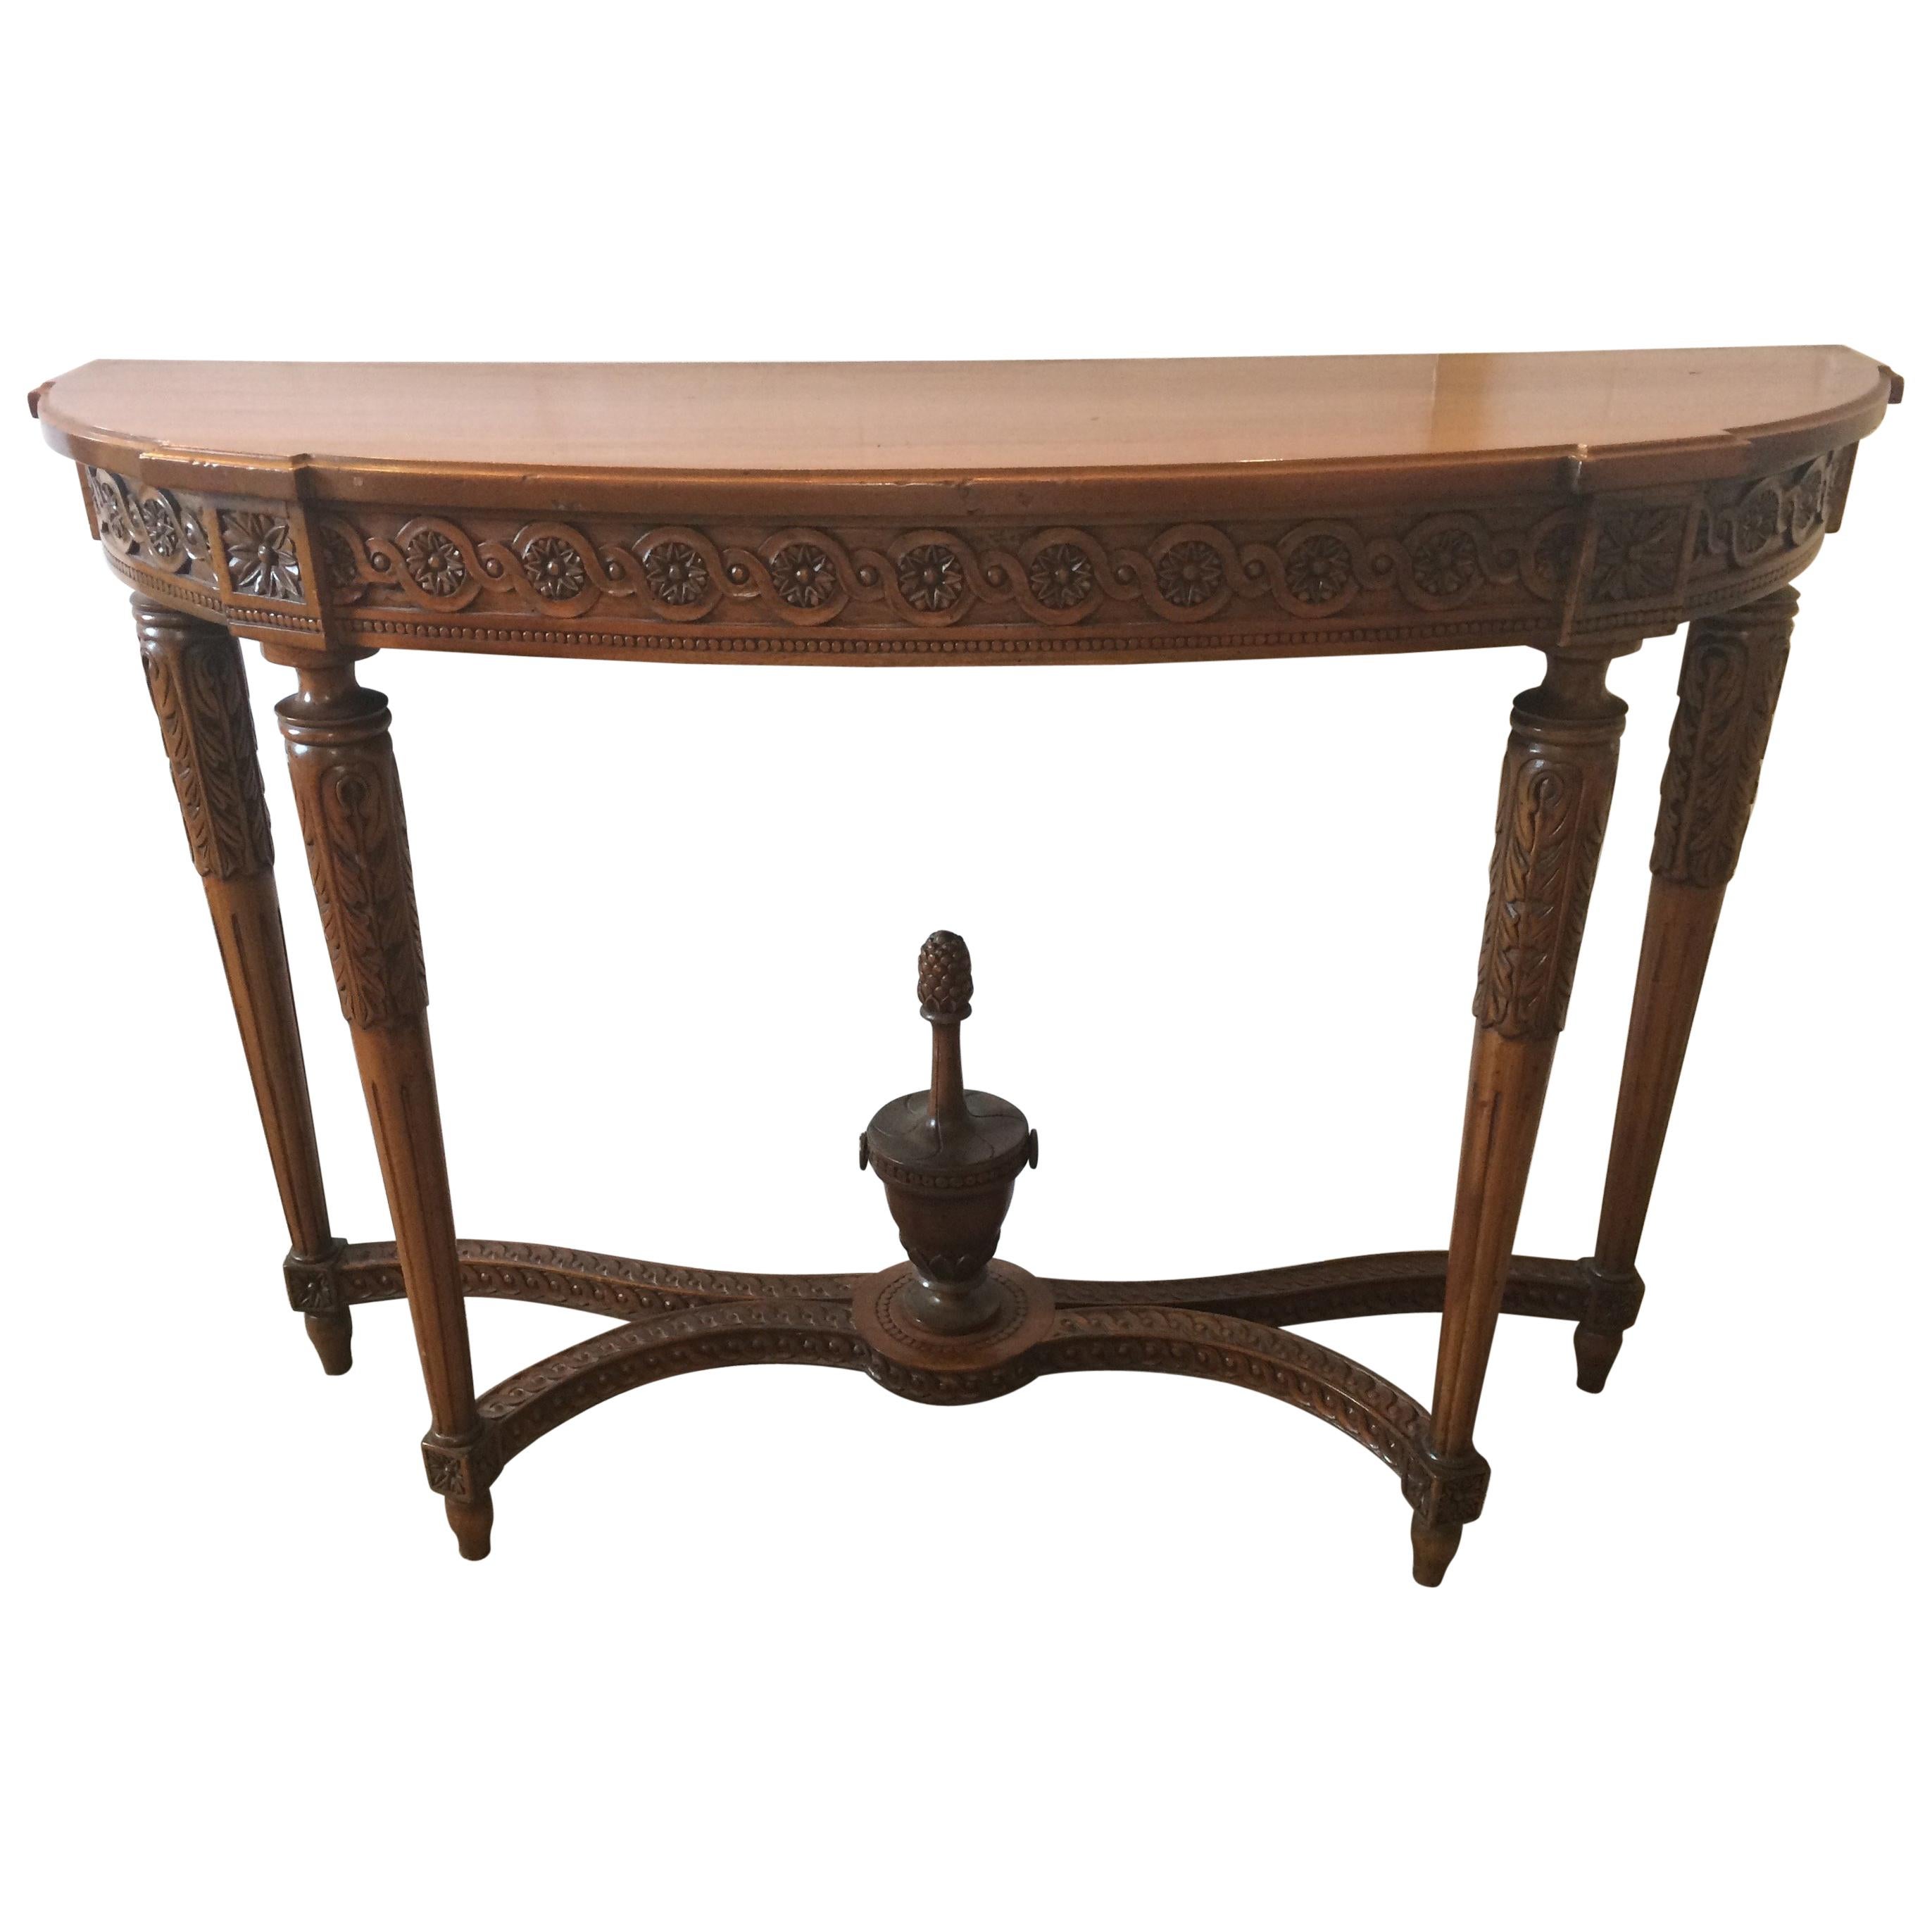 Classically Elegant 19th Century French Carved Walnut Demilune Console Table